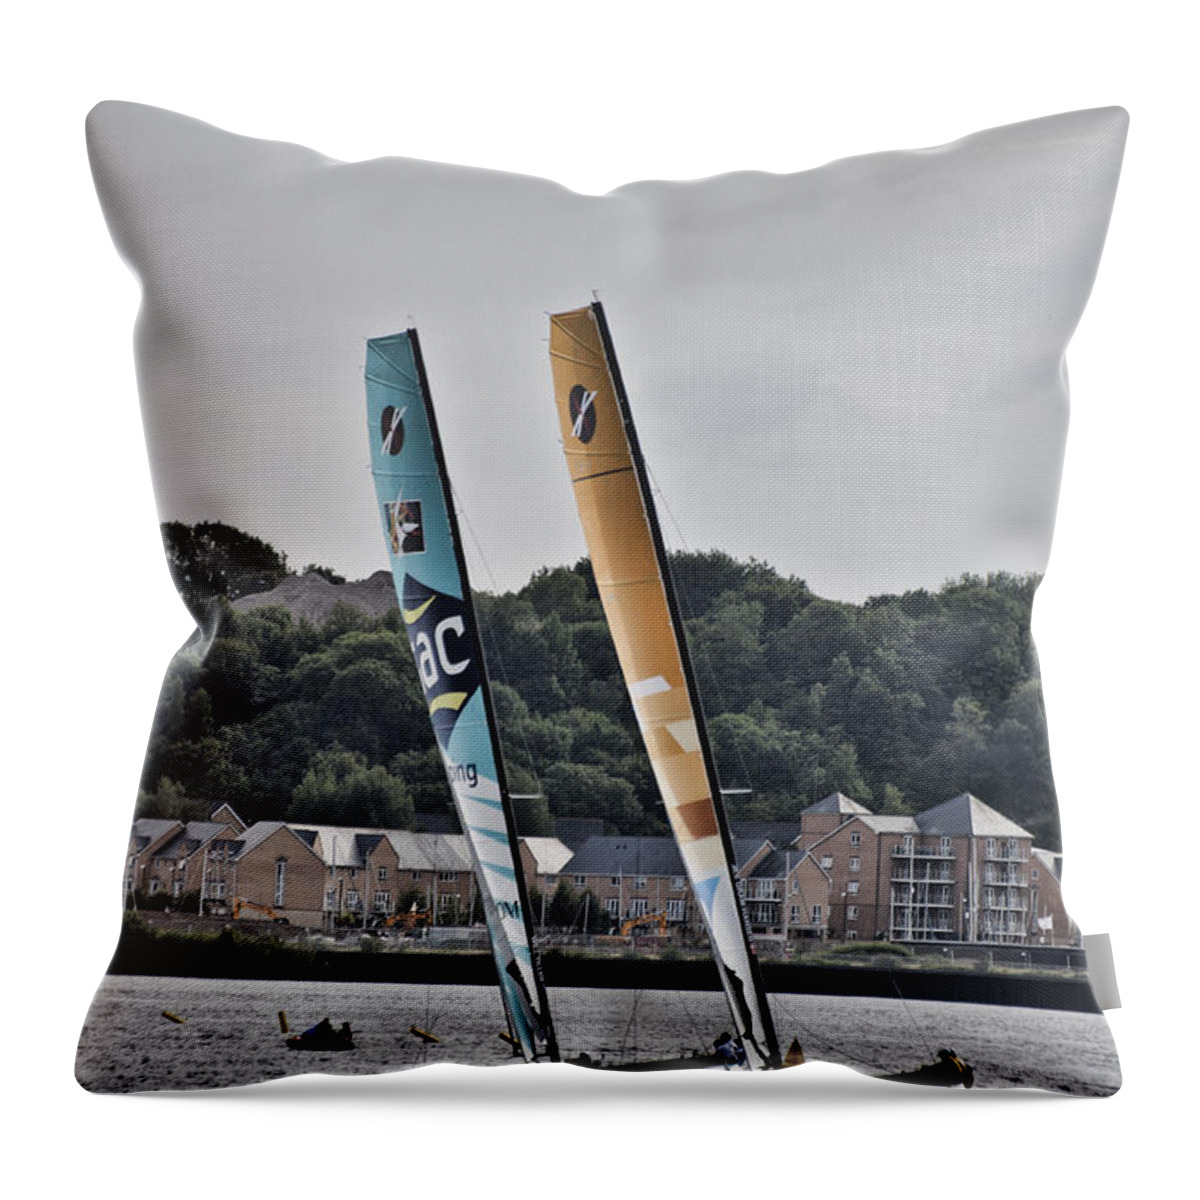 Extreme 40 Catamarans Throw Pillow featuring the photograph Extreme 40 In Unison by Steve Purnell